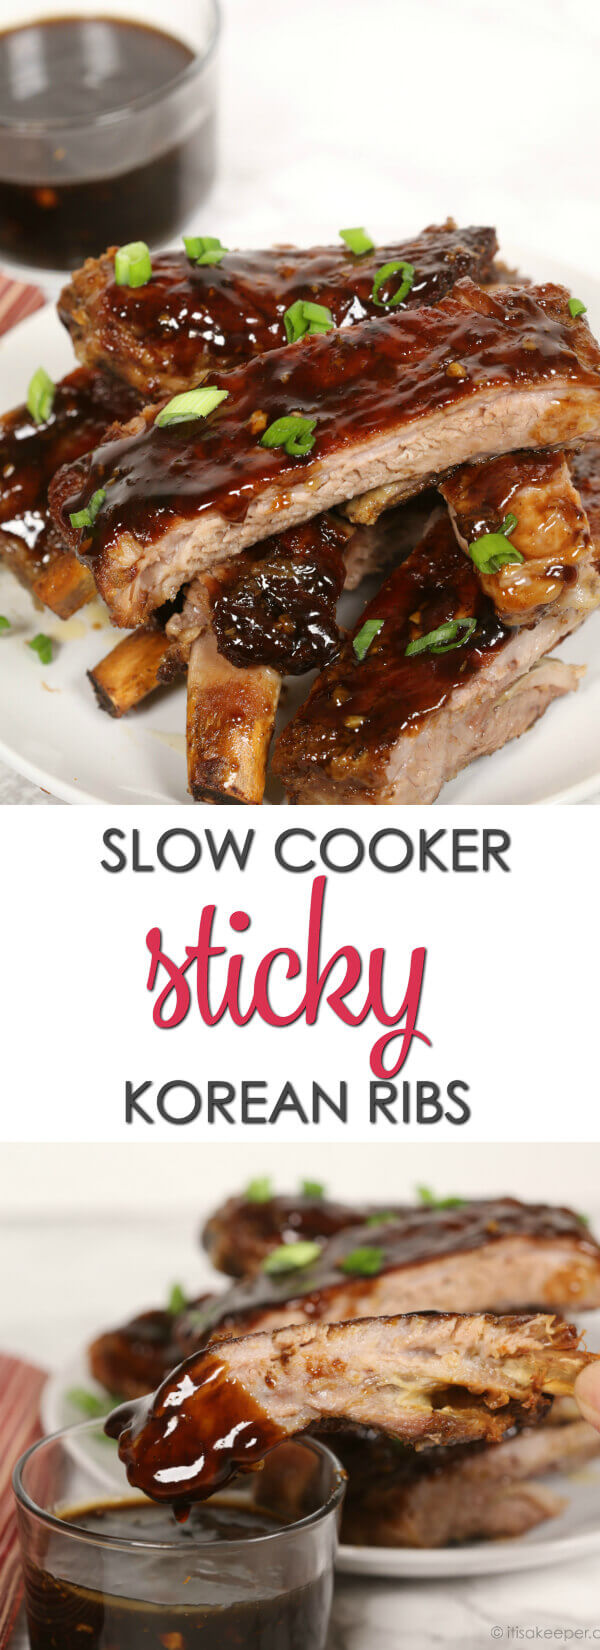 Slow Cooker Sticky Korean Ribs - these are so tender and flavorful. The sticky glaze in AMAZING! One of the best slow cooker recipes of all time